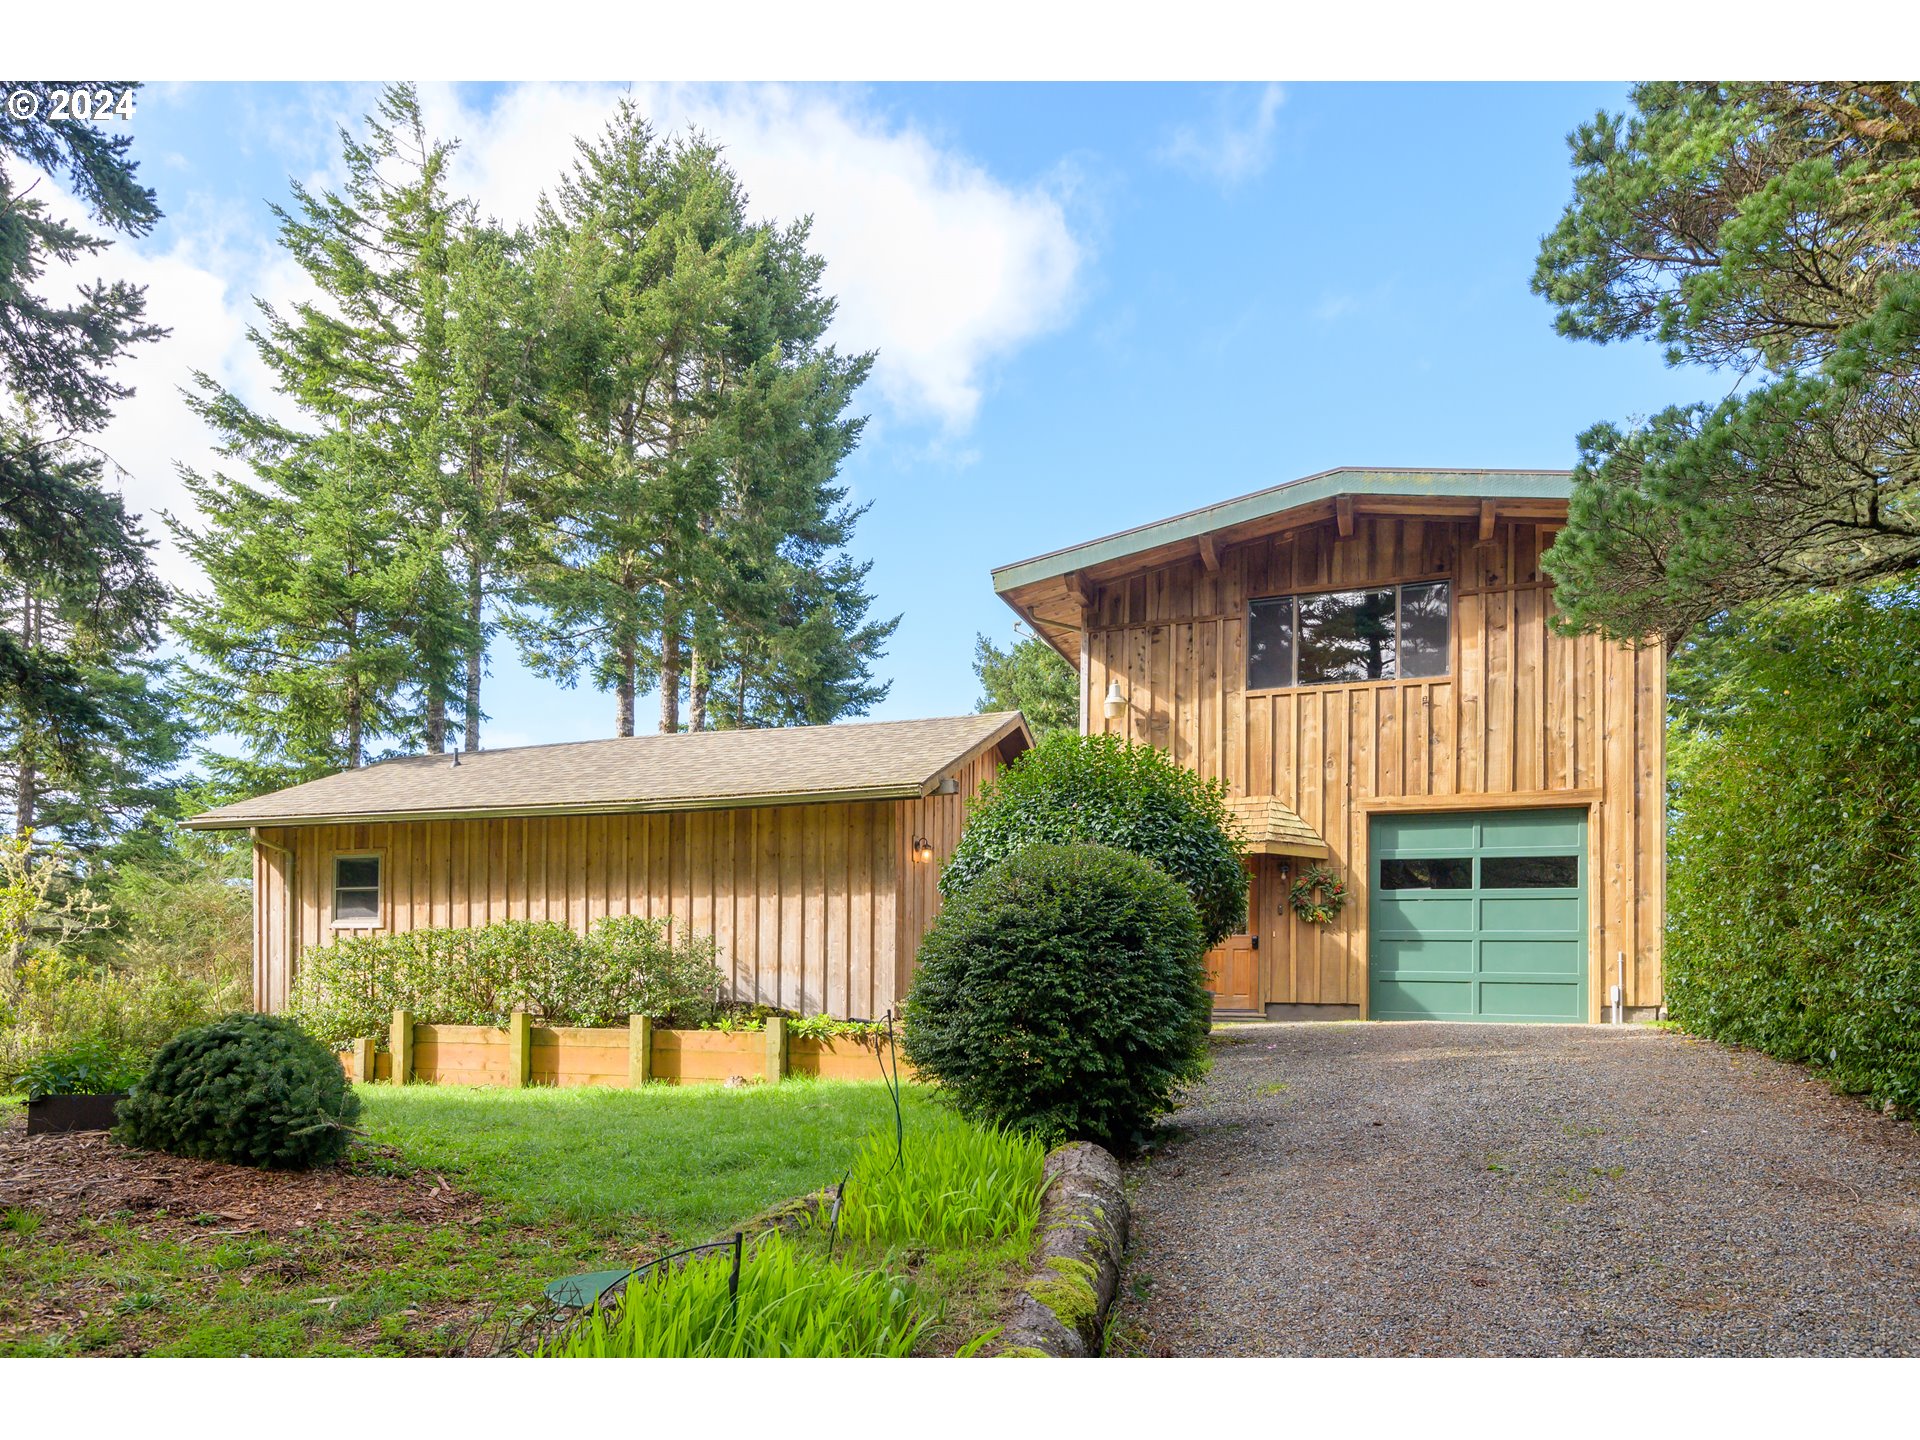 47256 LAKES END DR, Langlois, OR 